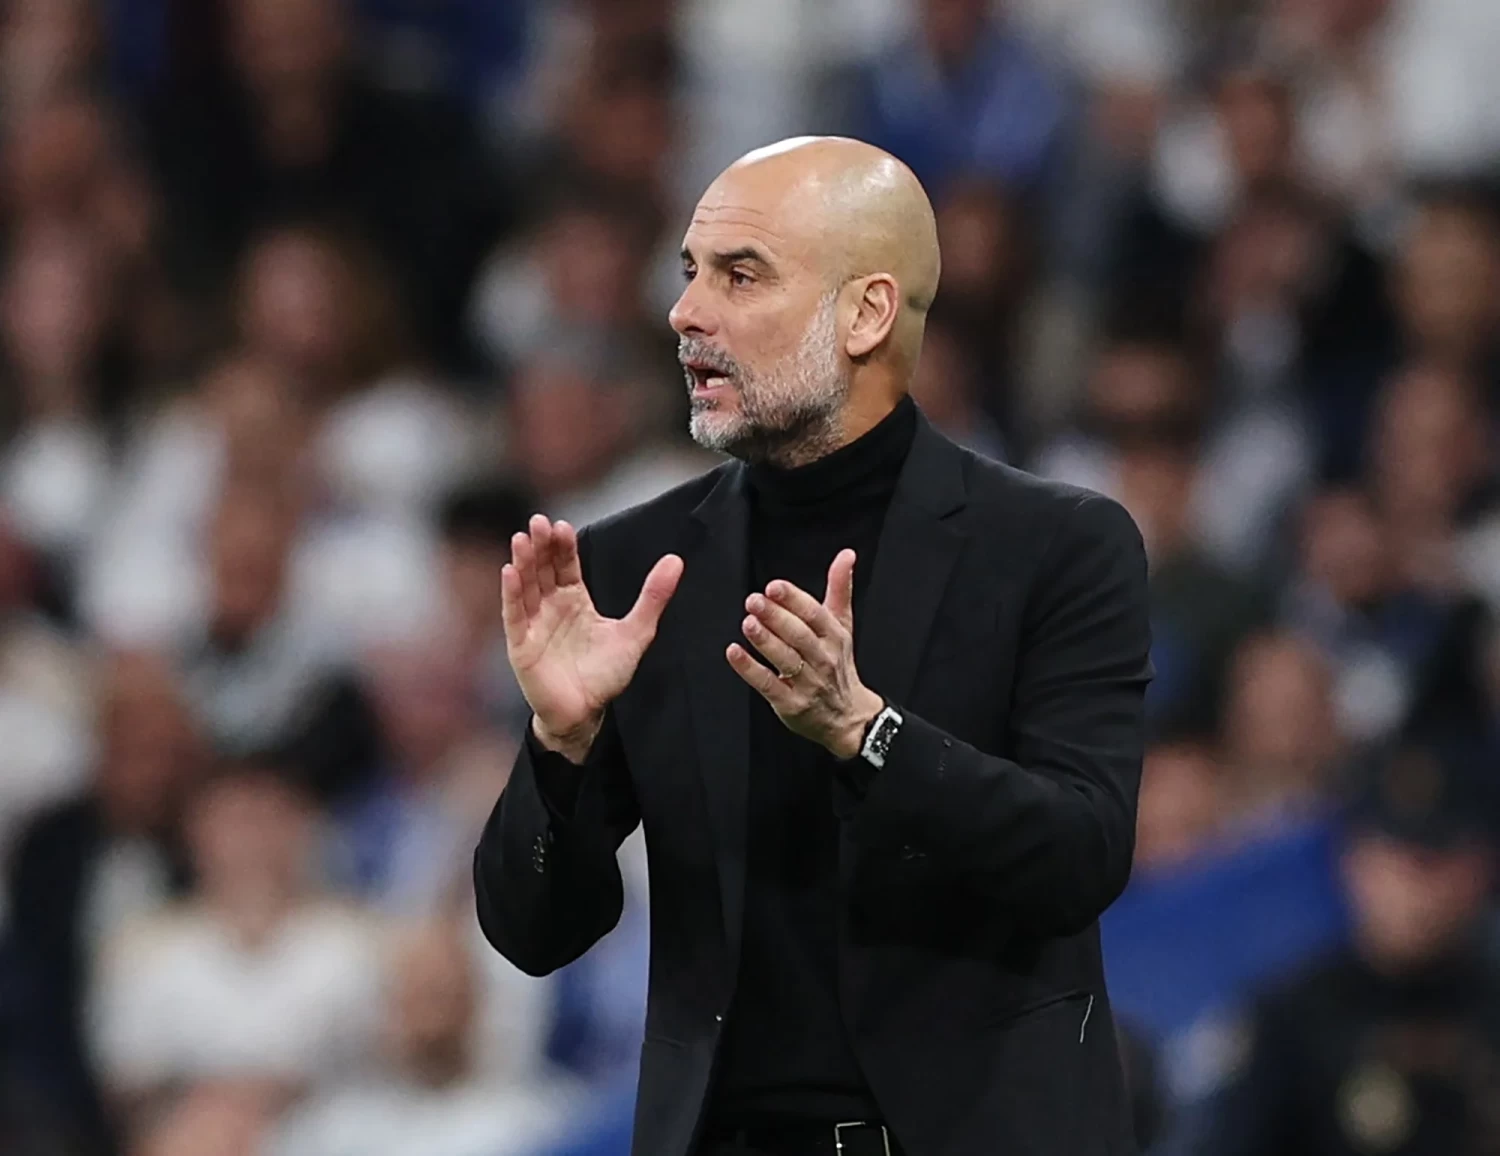 Pep Guardiola’s $1.26m watch makes headlines after Champions League match